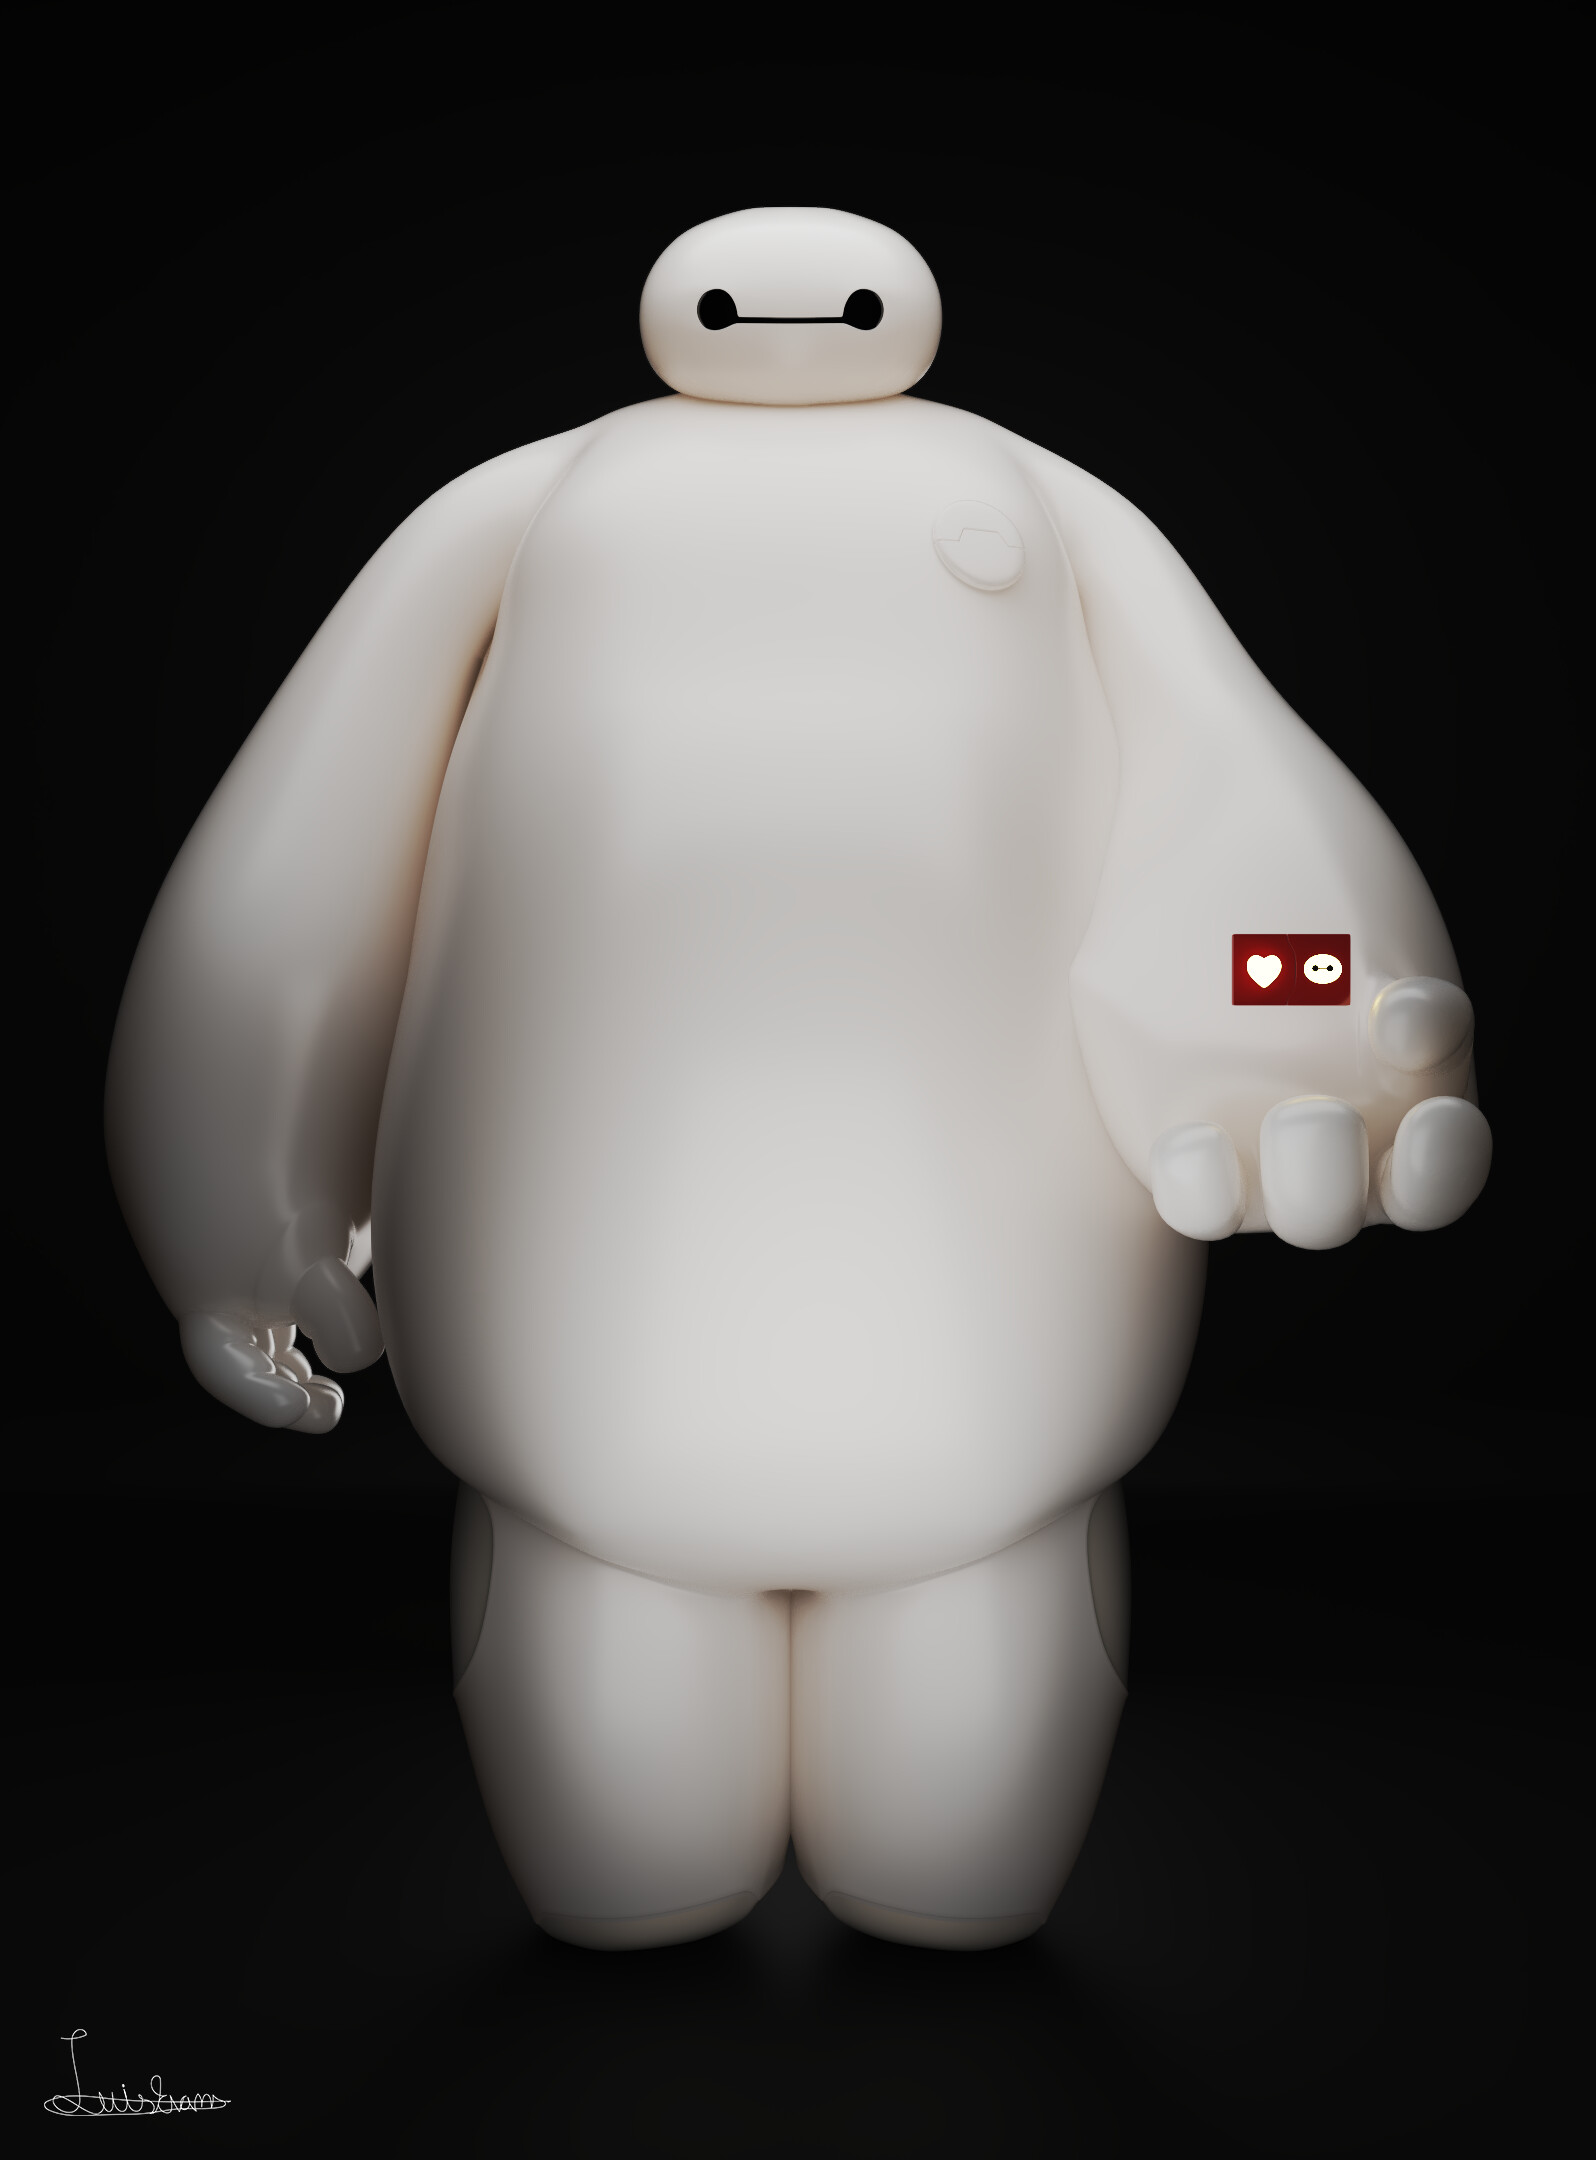 ArtStation - Baymax|Take it and Control Me!